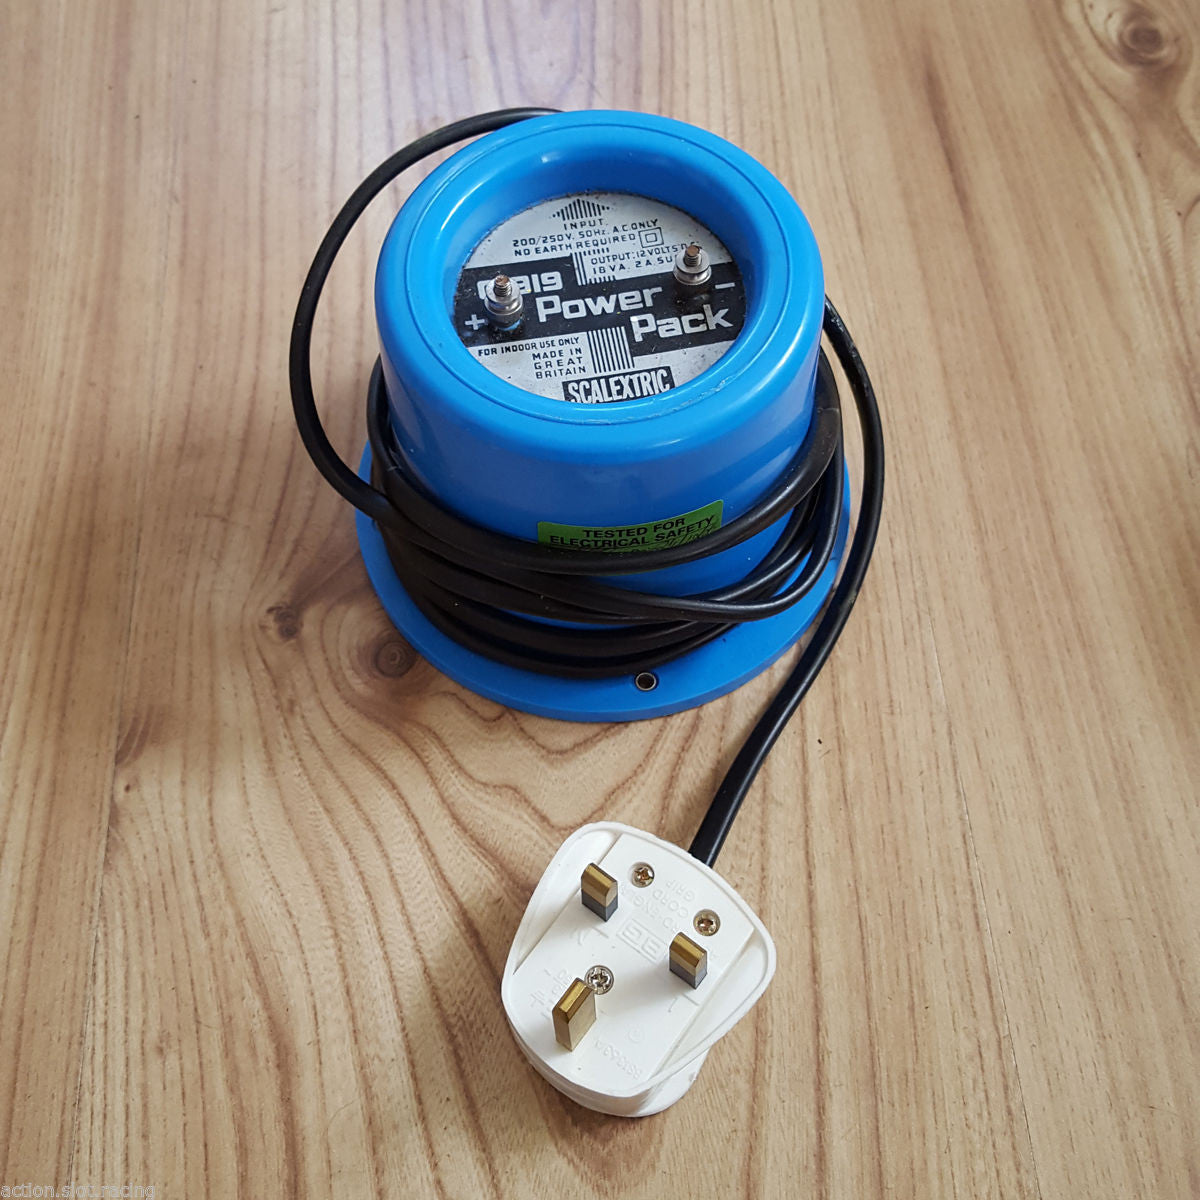 Scalextric Classic Power Pack Supply C919 Transformer - Blue Round Type 12V